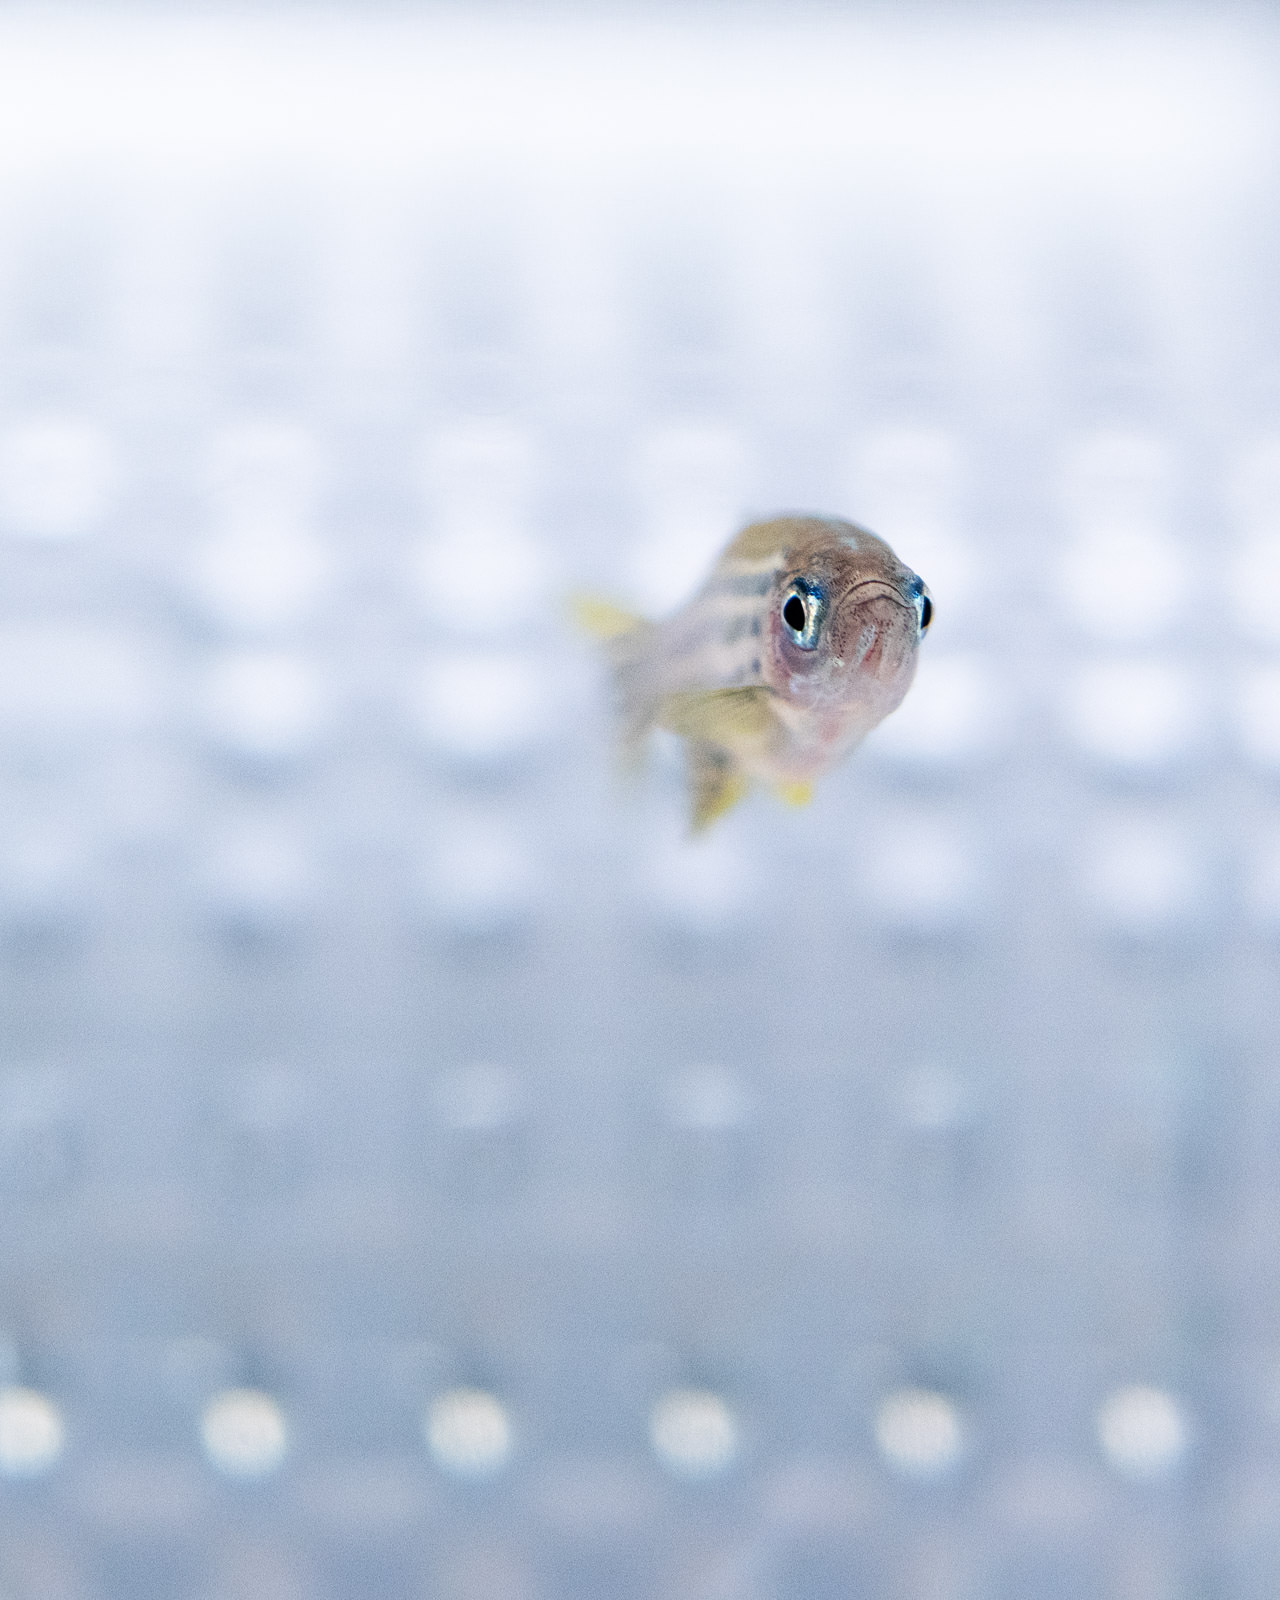 Animal research - Science Photography by Philippe Wiget - Zebrafish